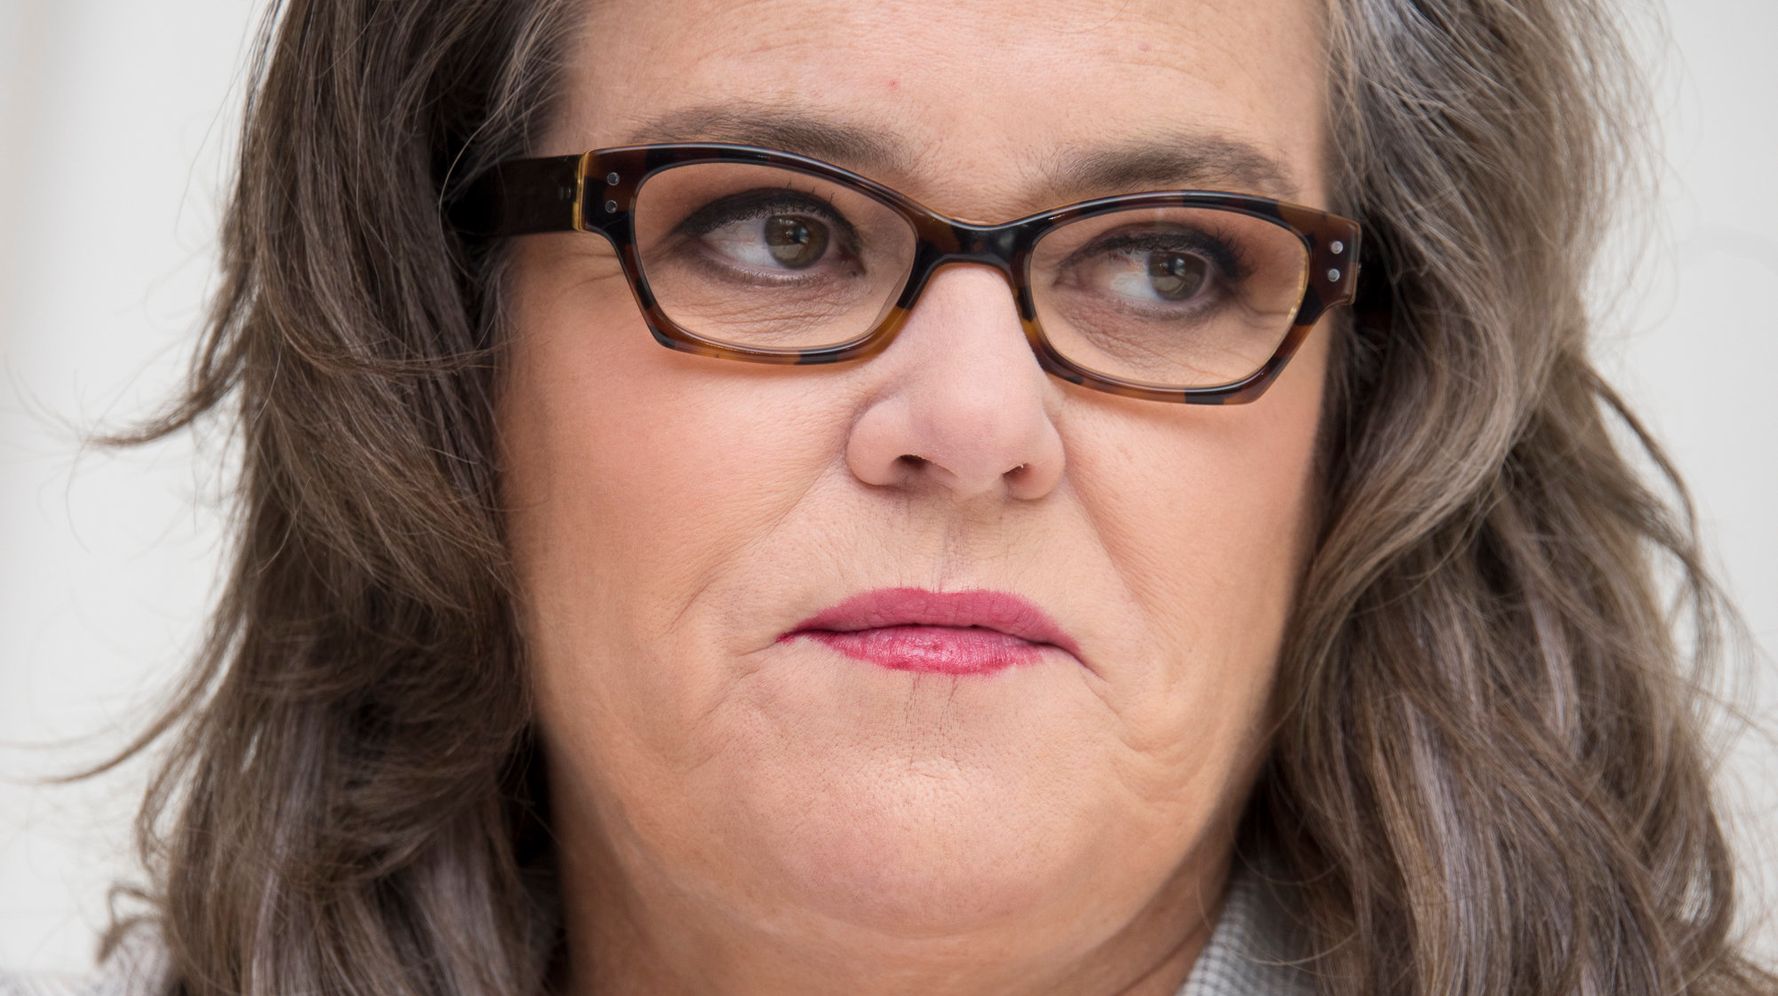 Rosie O'Donnell Says Her Father Sexually Abused Her When She Was A Chi...